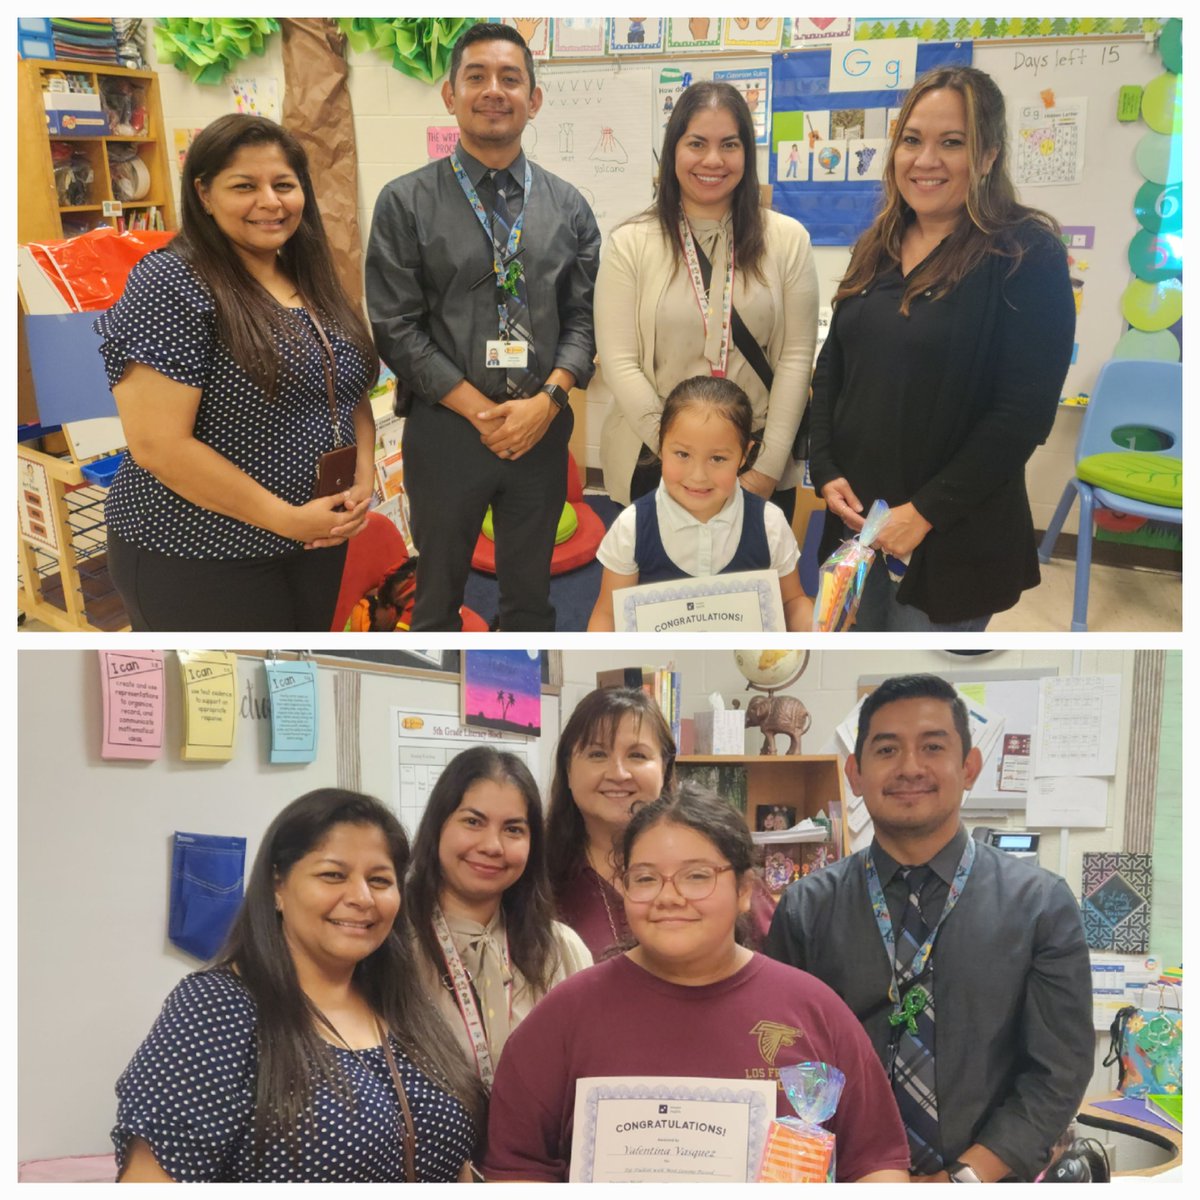 Congratulations to these wonderful students from @PLE_Panthers who won the Imagine Math Campus Top Student contest: Noemi (PreK) and Valentina (5th grade)!! 🏆🎉👏 @jenkennedylf @ImagineLearning @tudon26